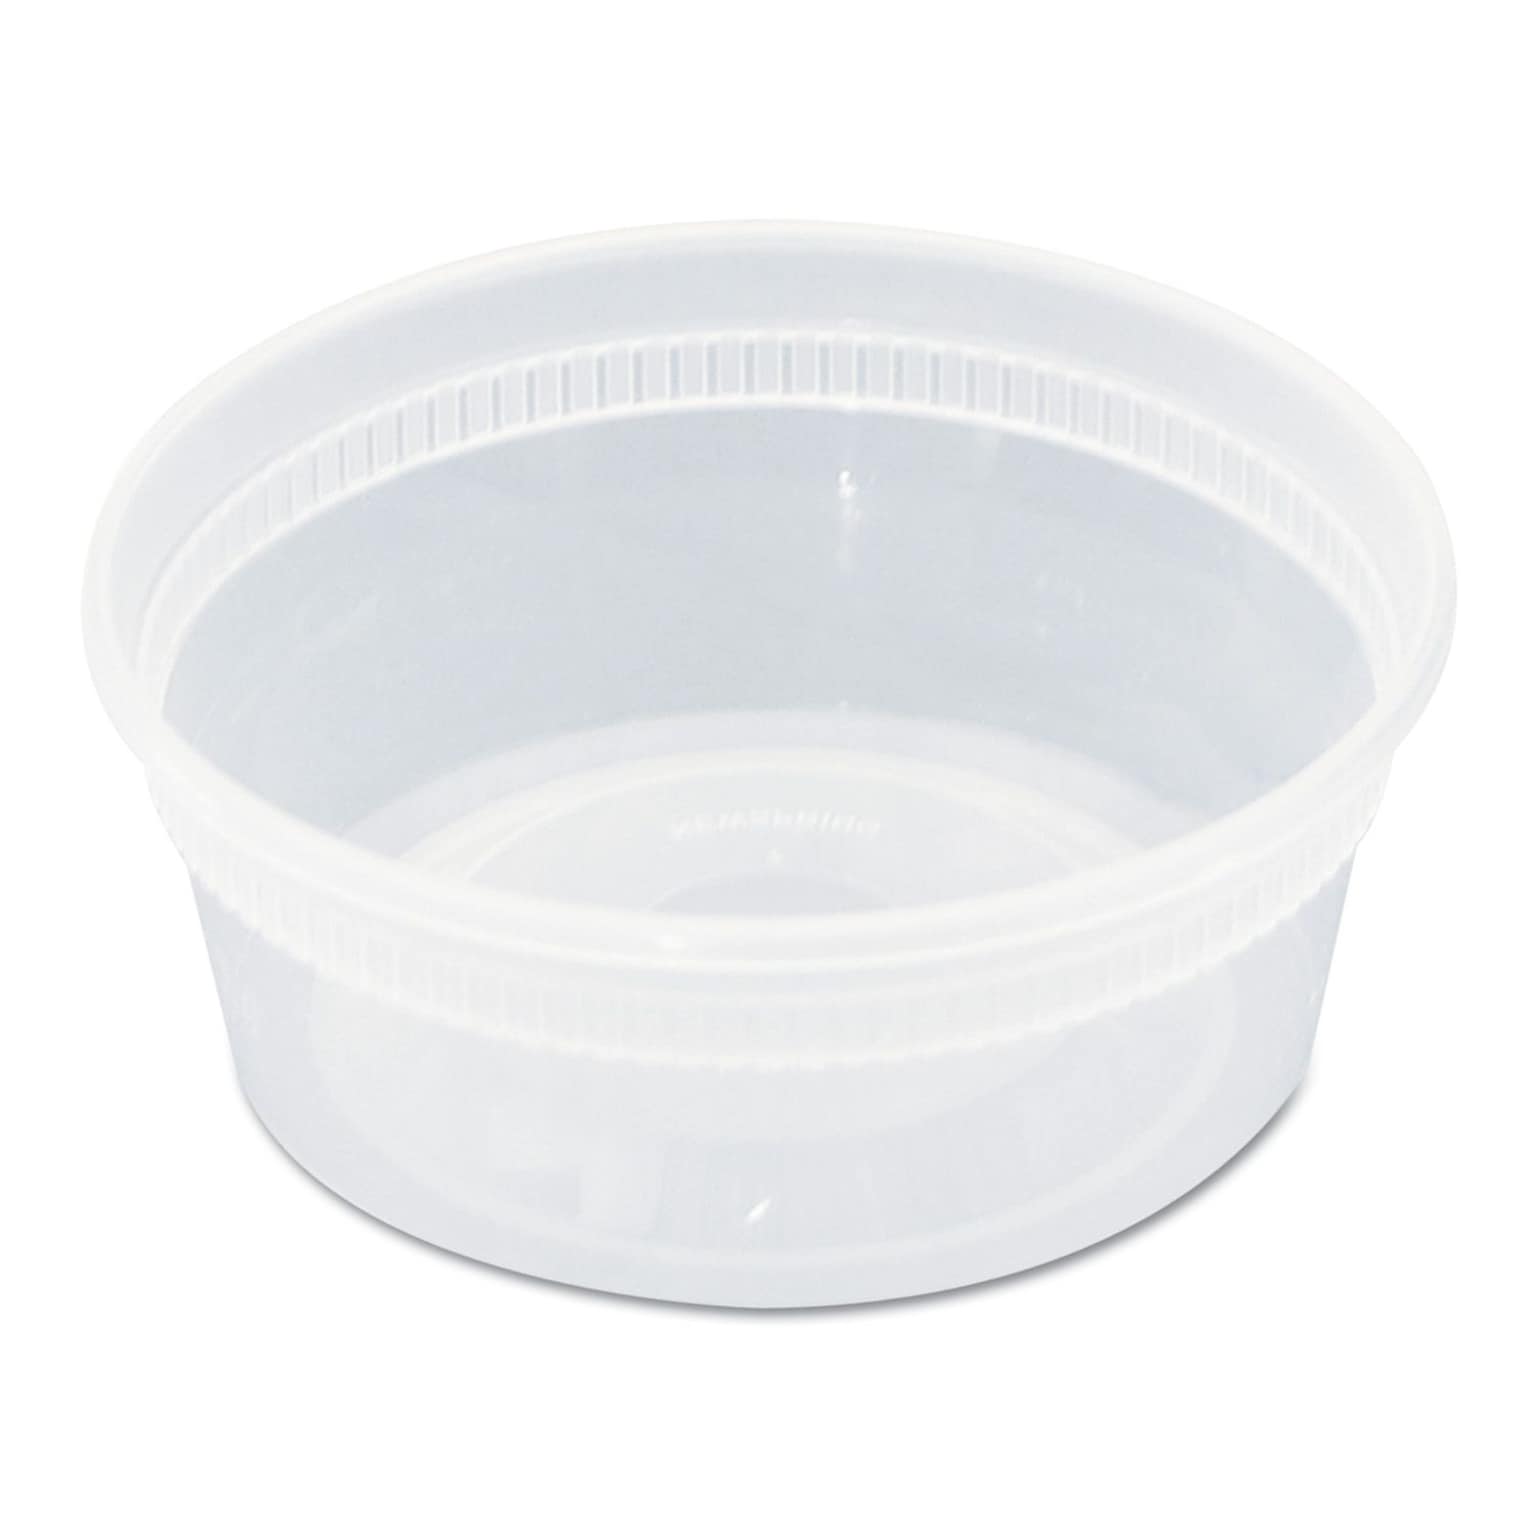 PACTIV REGIONAL MIX CNTR Plastic Container 8 Oz. Combo with Clear Lid